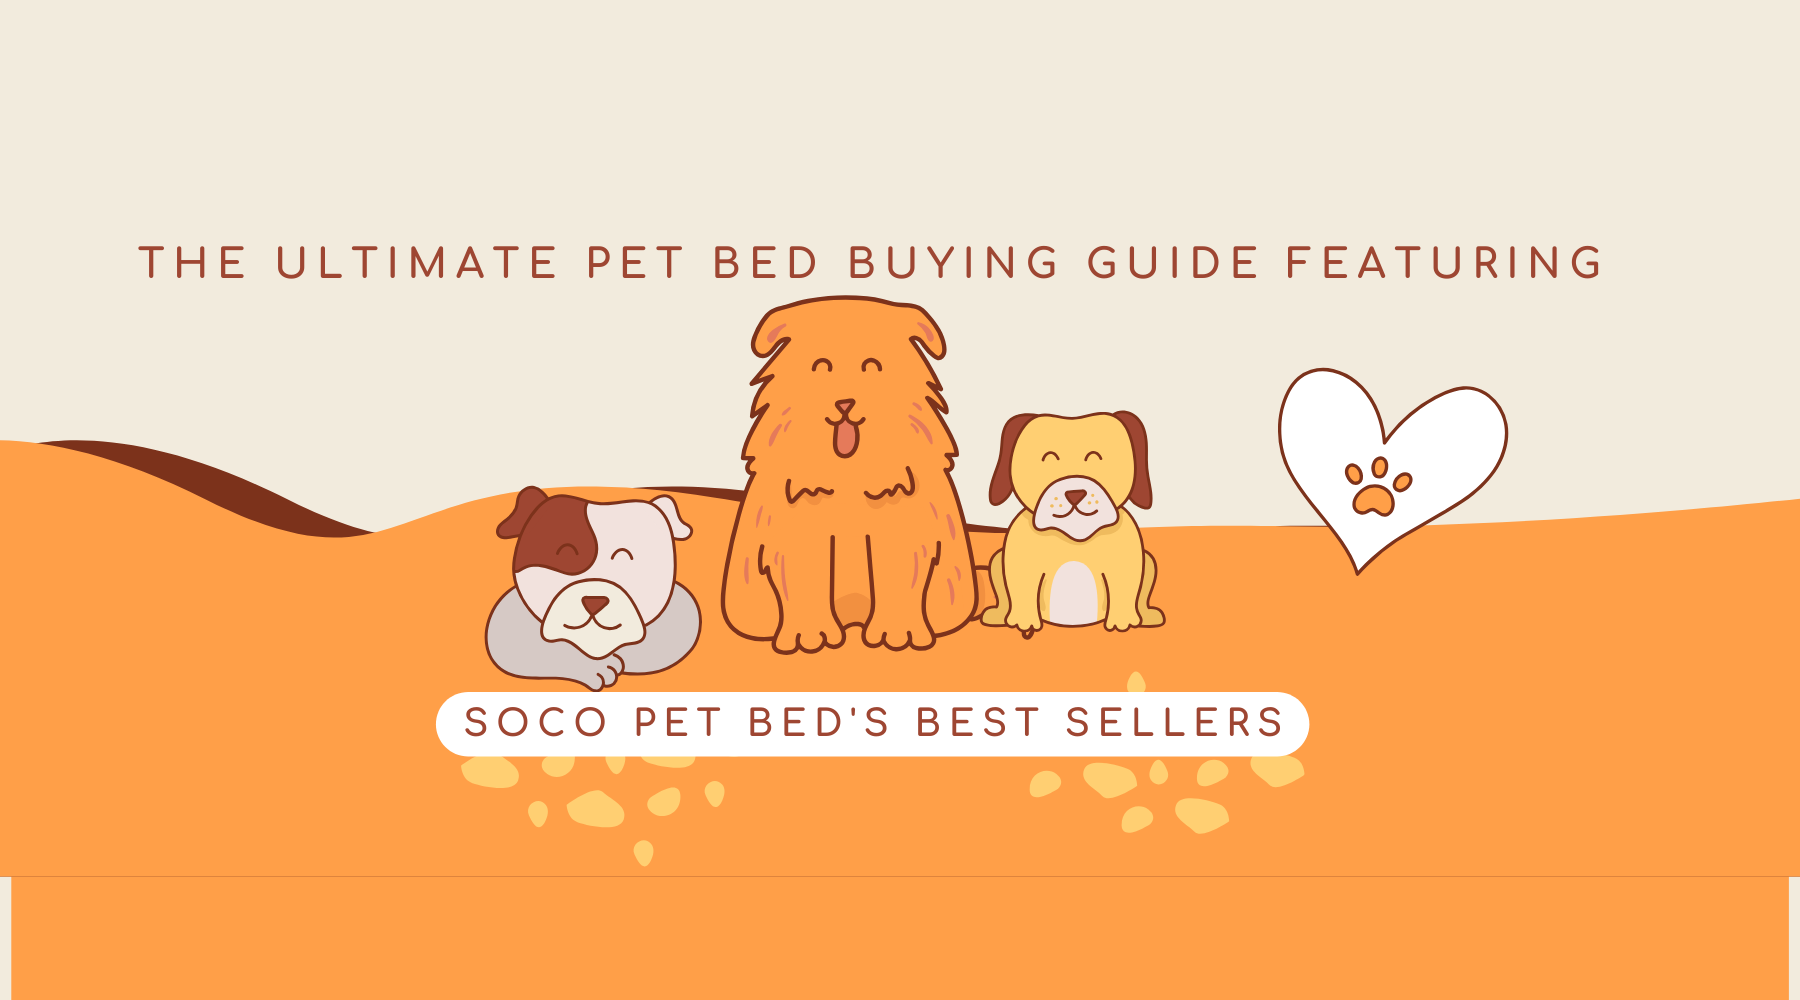 The Ultimate Pet Bed Buying Guide Featuring Soco Pet Bed's Best Sellers